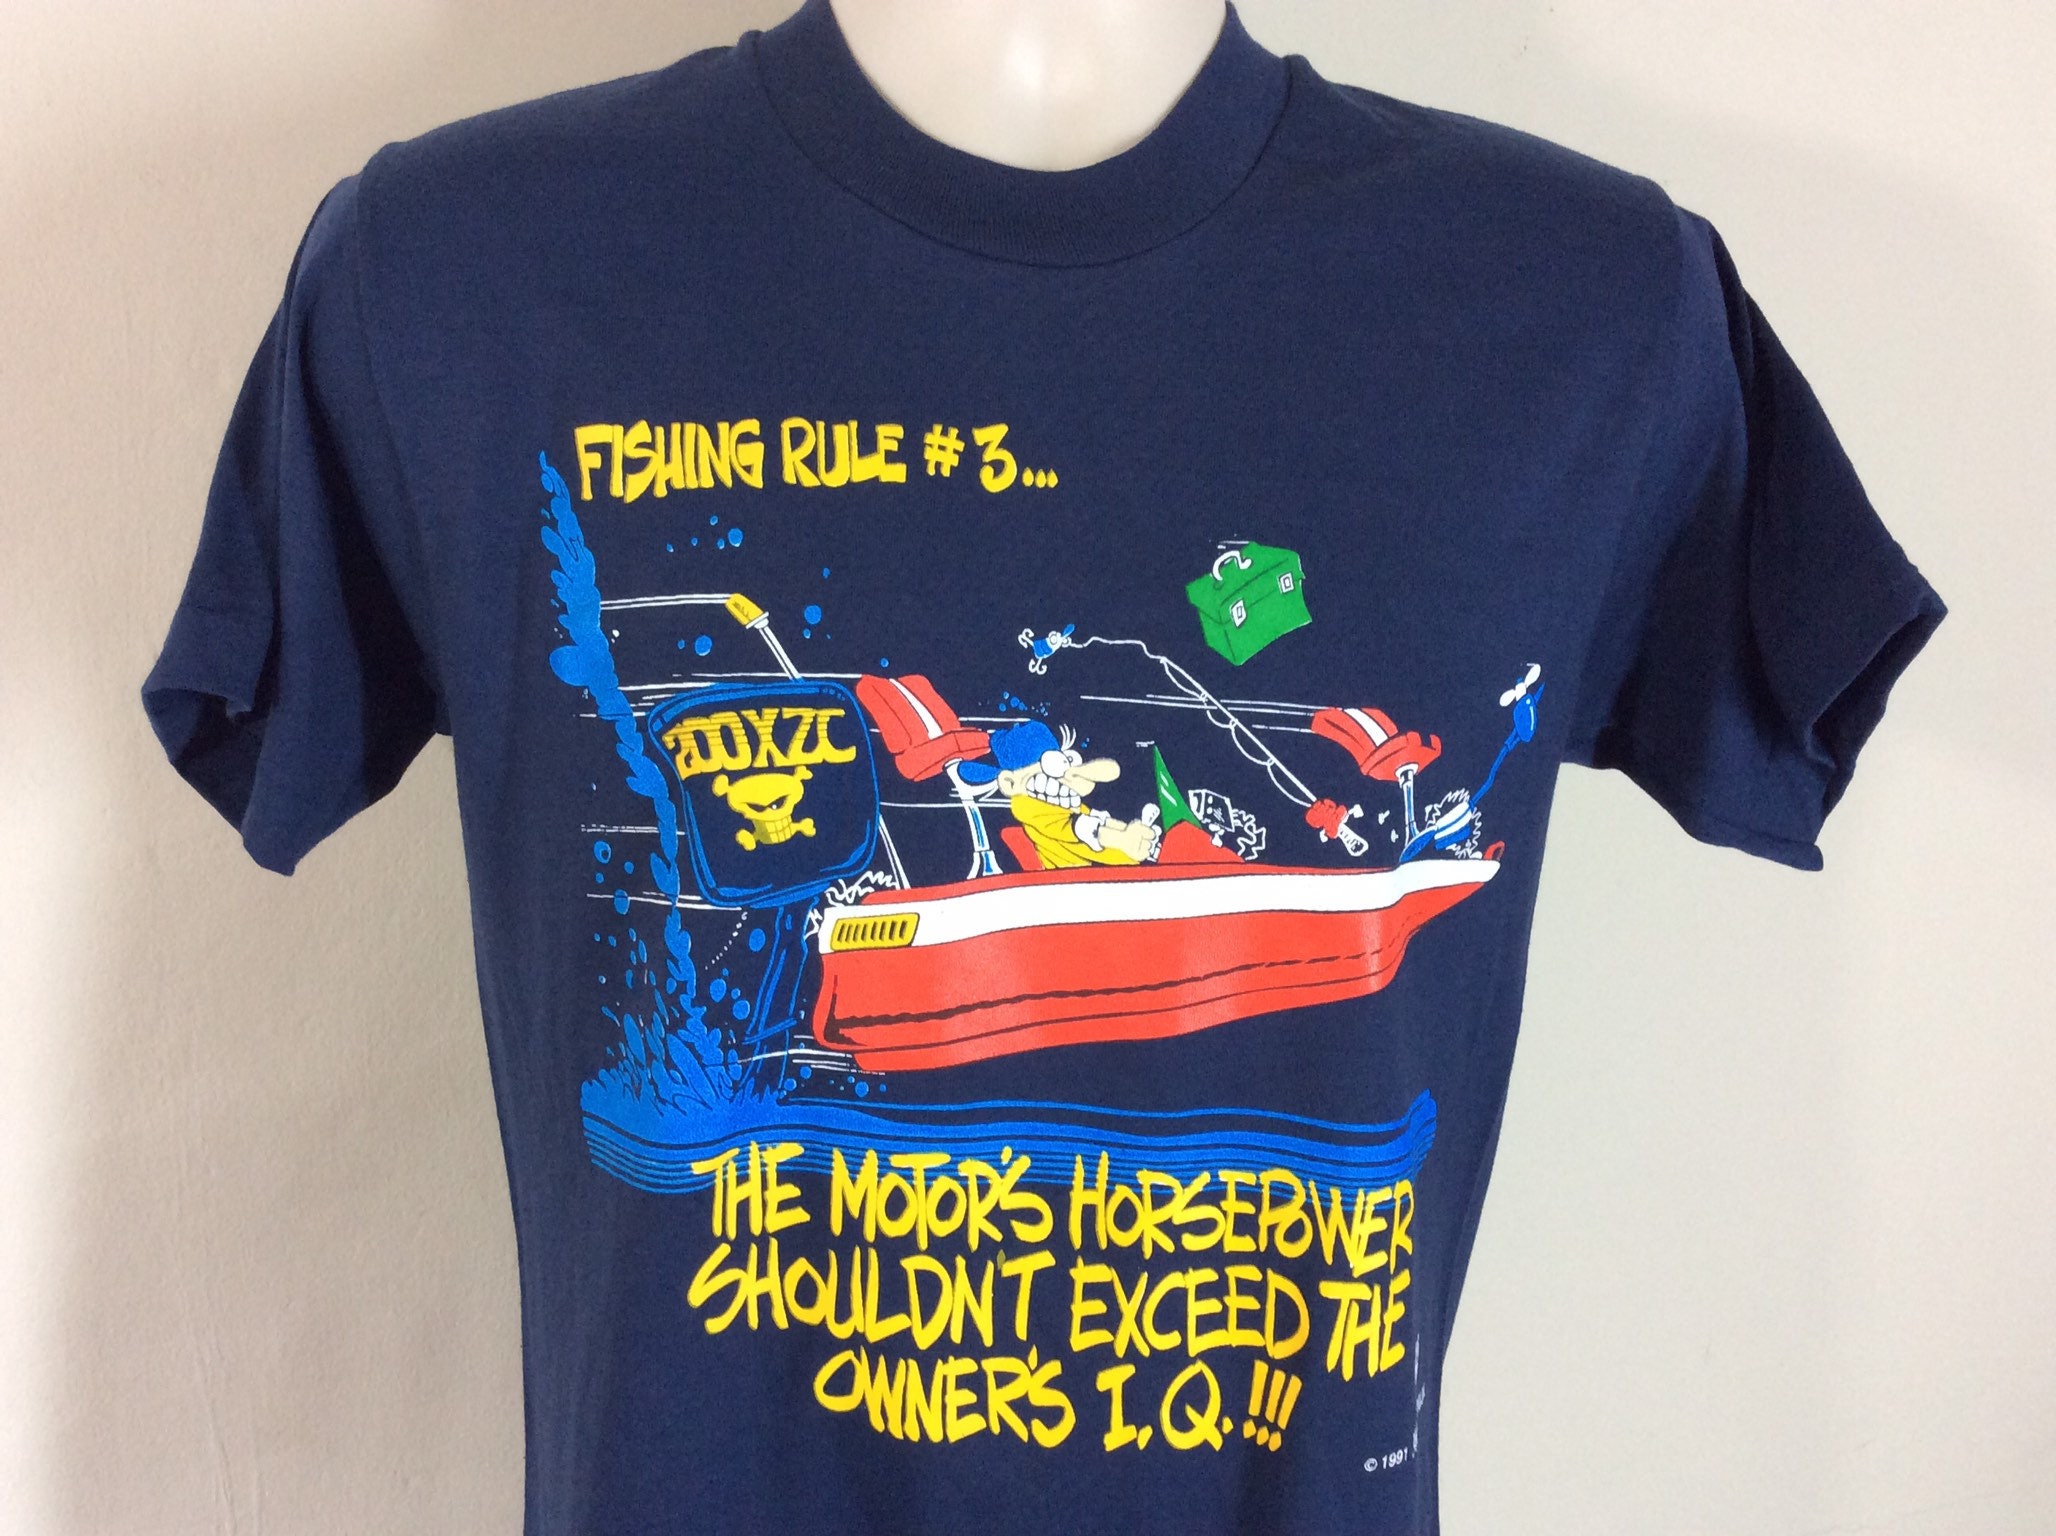 Vintage 1991 Fishing Rule Number 3 The Motor's Power Shouldn't Exceed The Owner's IQ T Shirt Blue